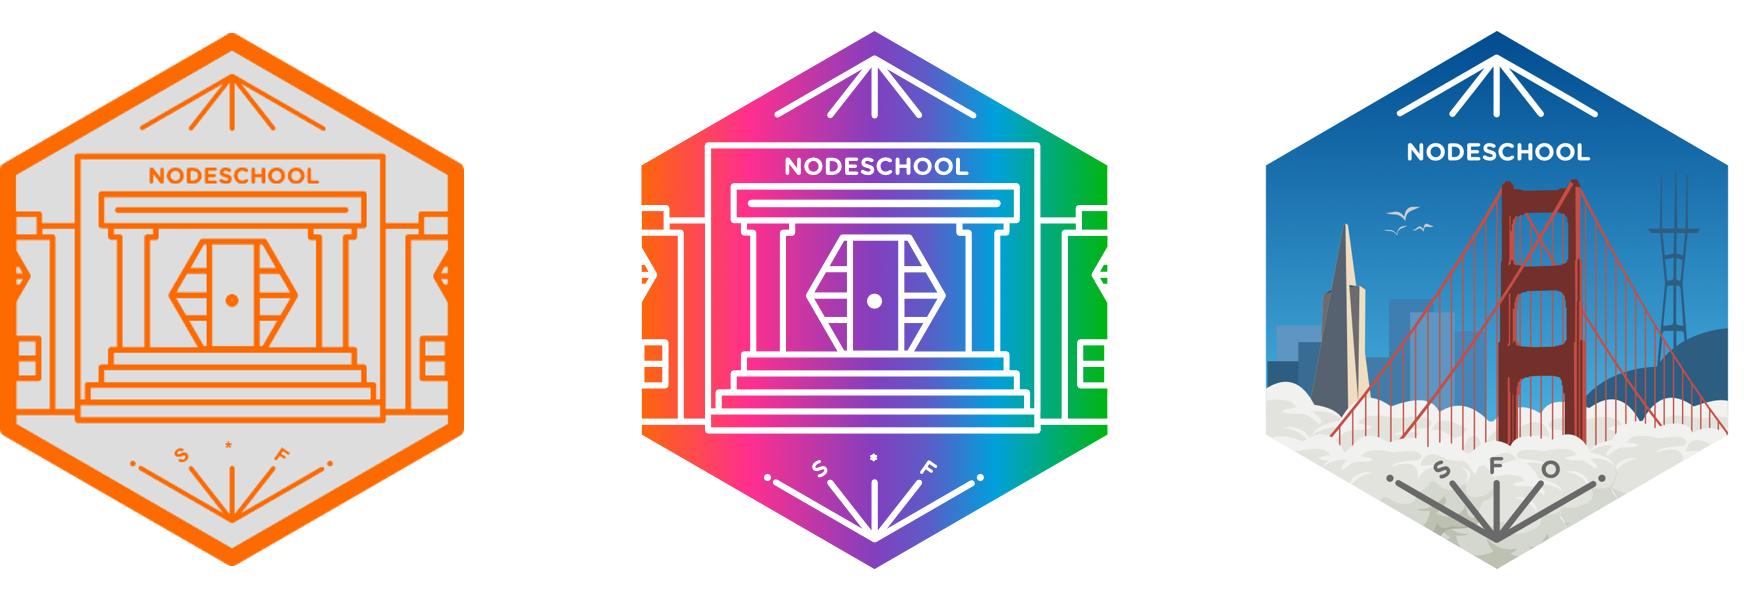 the three sticker designs of nodeschool sf: simple solid color to rainbow to vector art of San Francisco landmarks